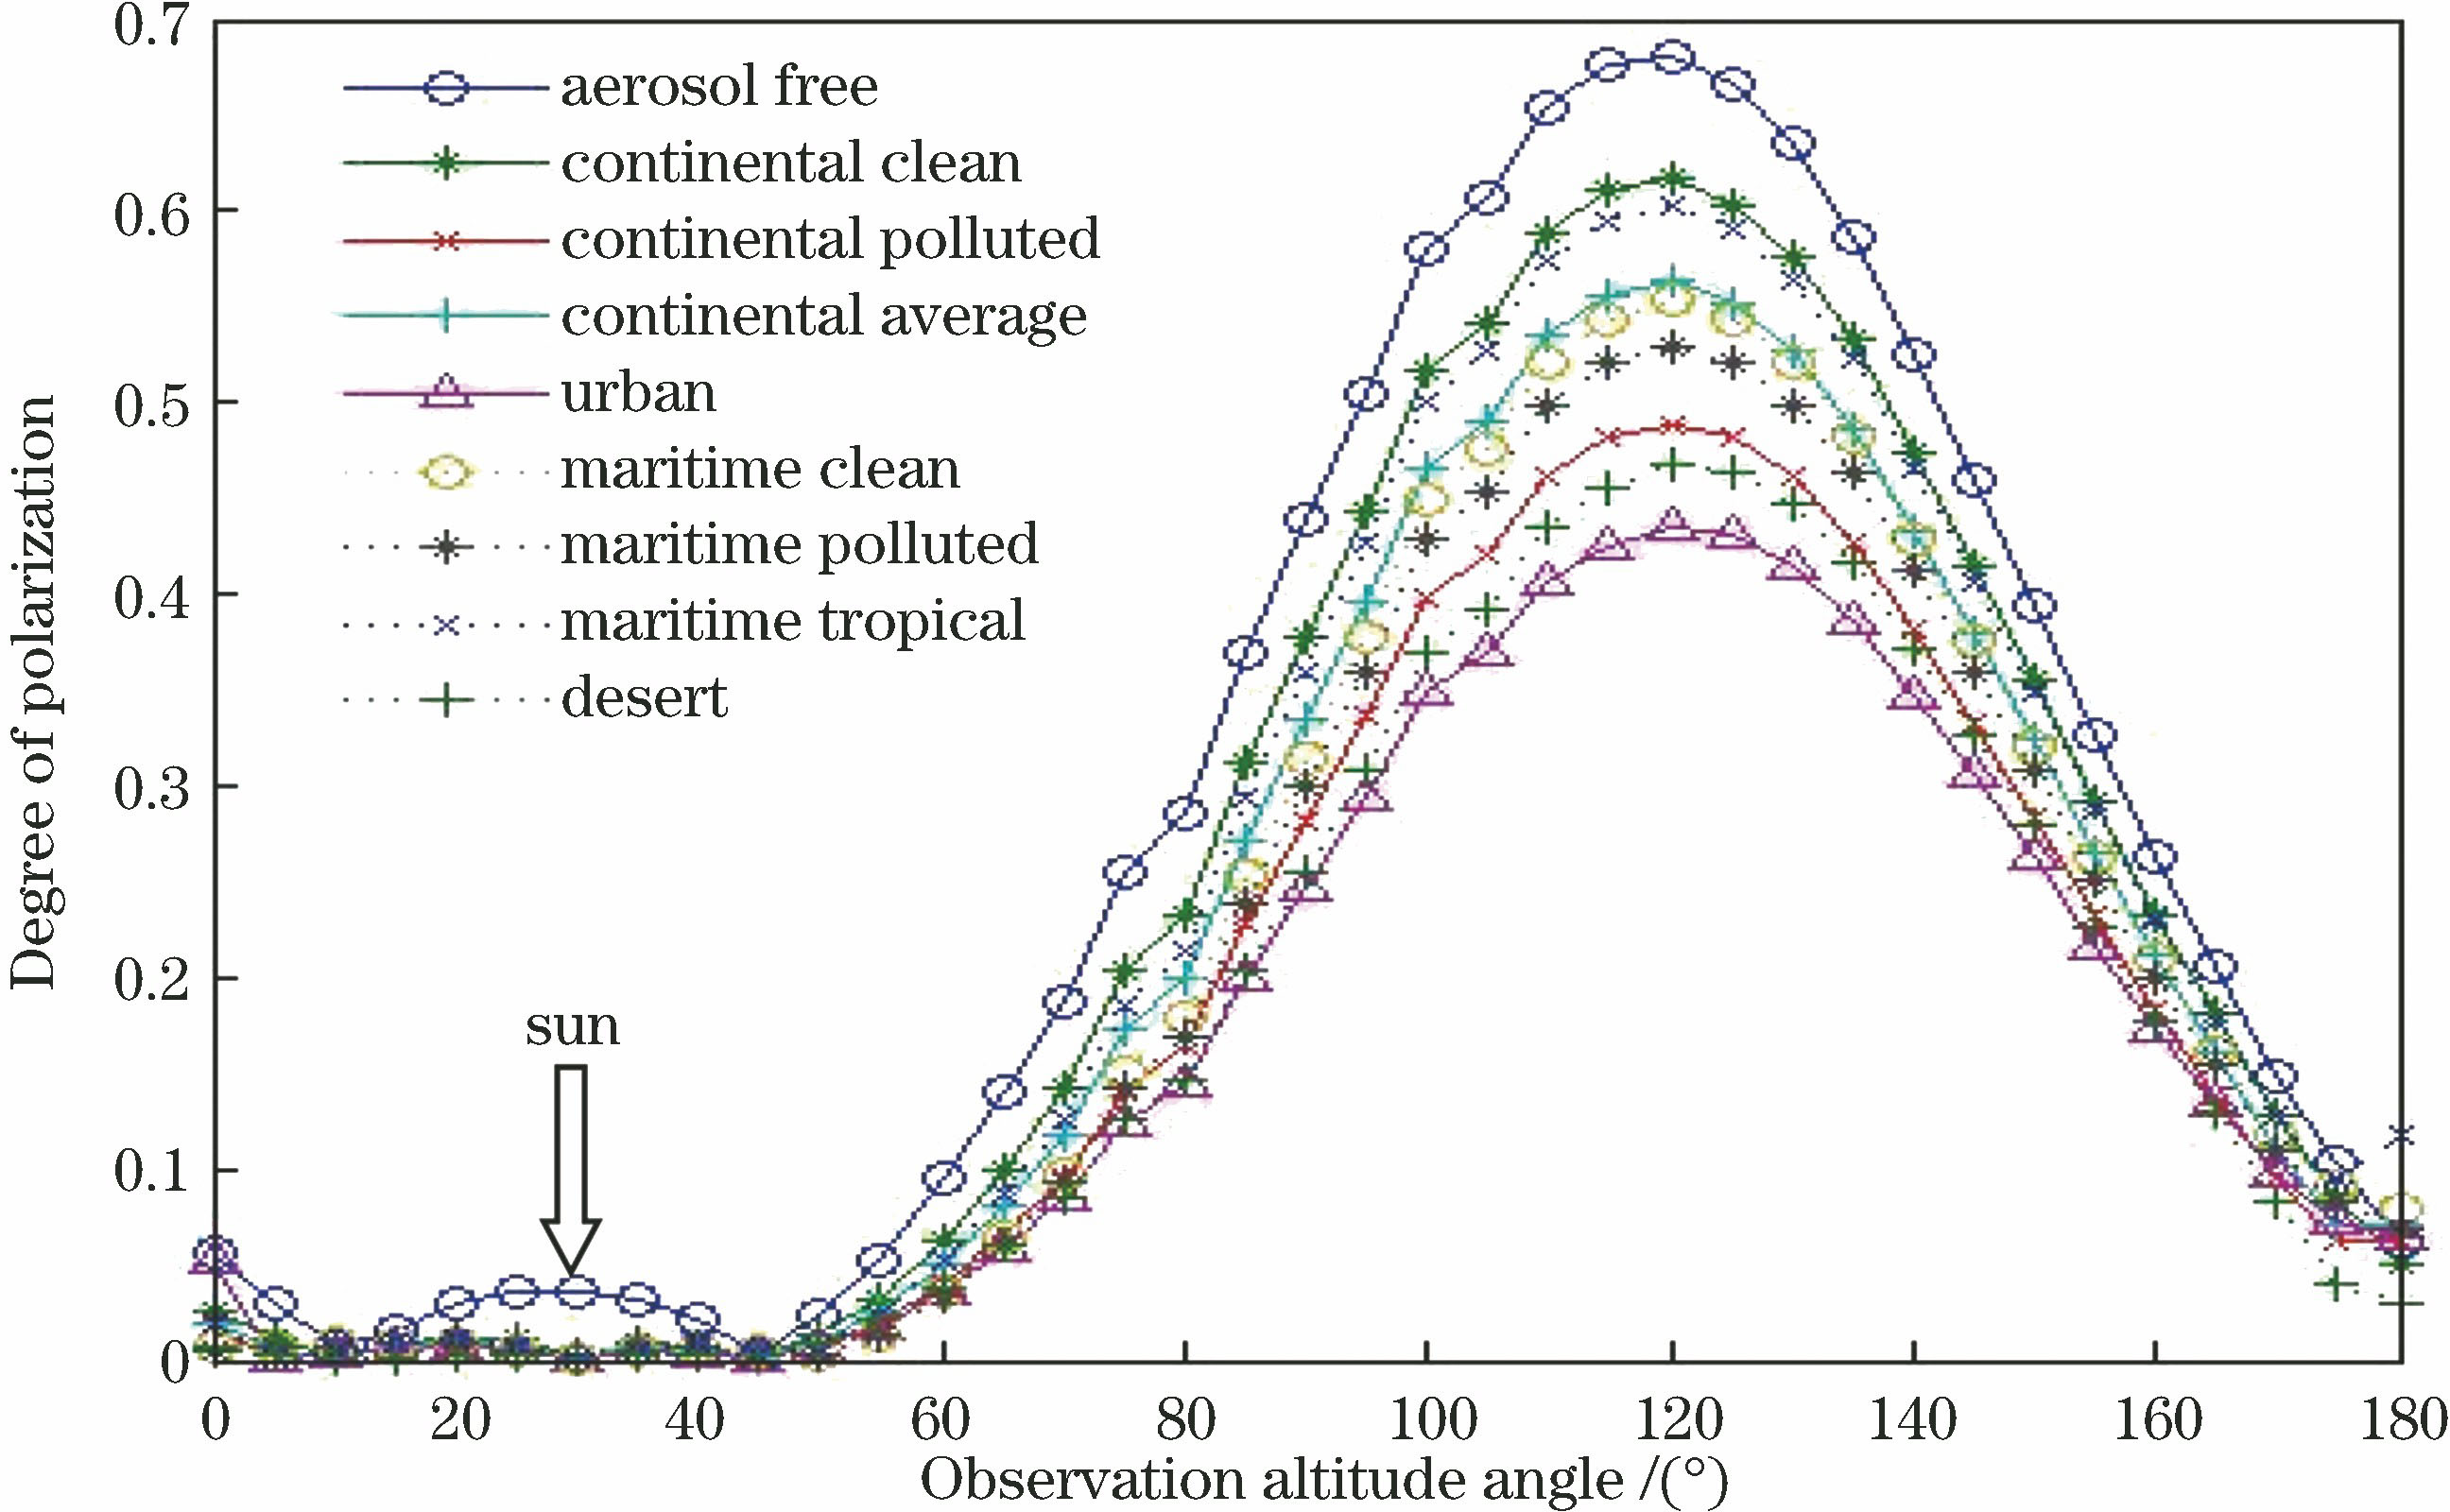 Degree of polarization of meridian versus observation altitude angle under different aerosol types